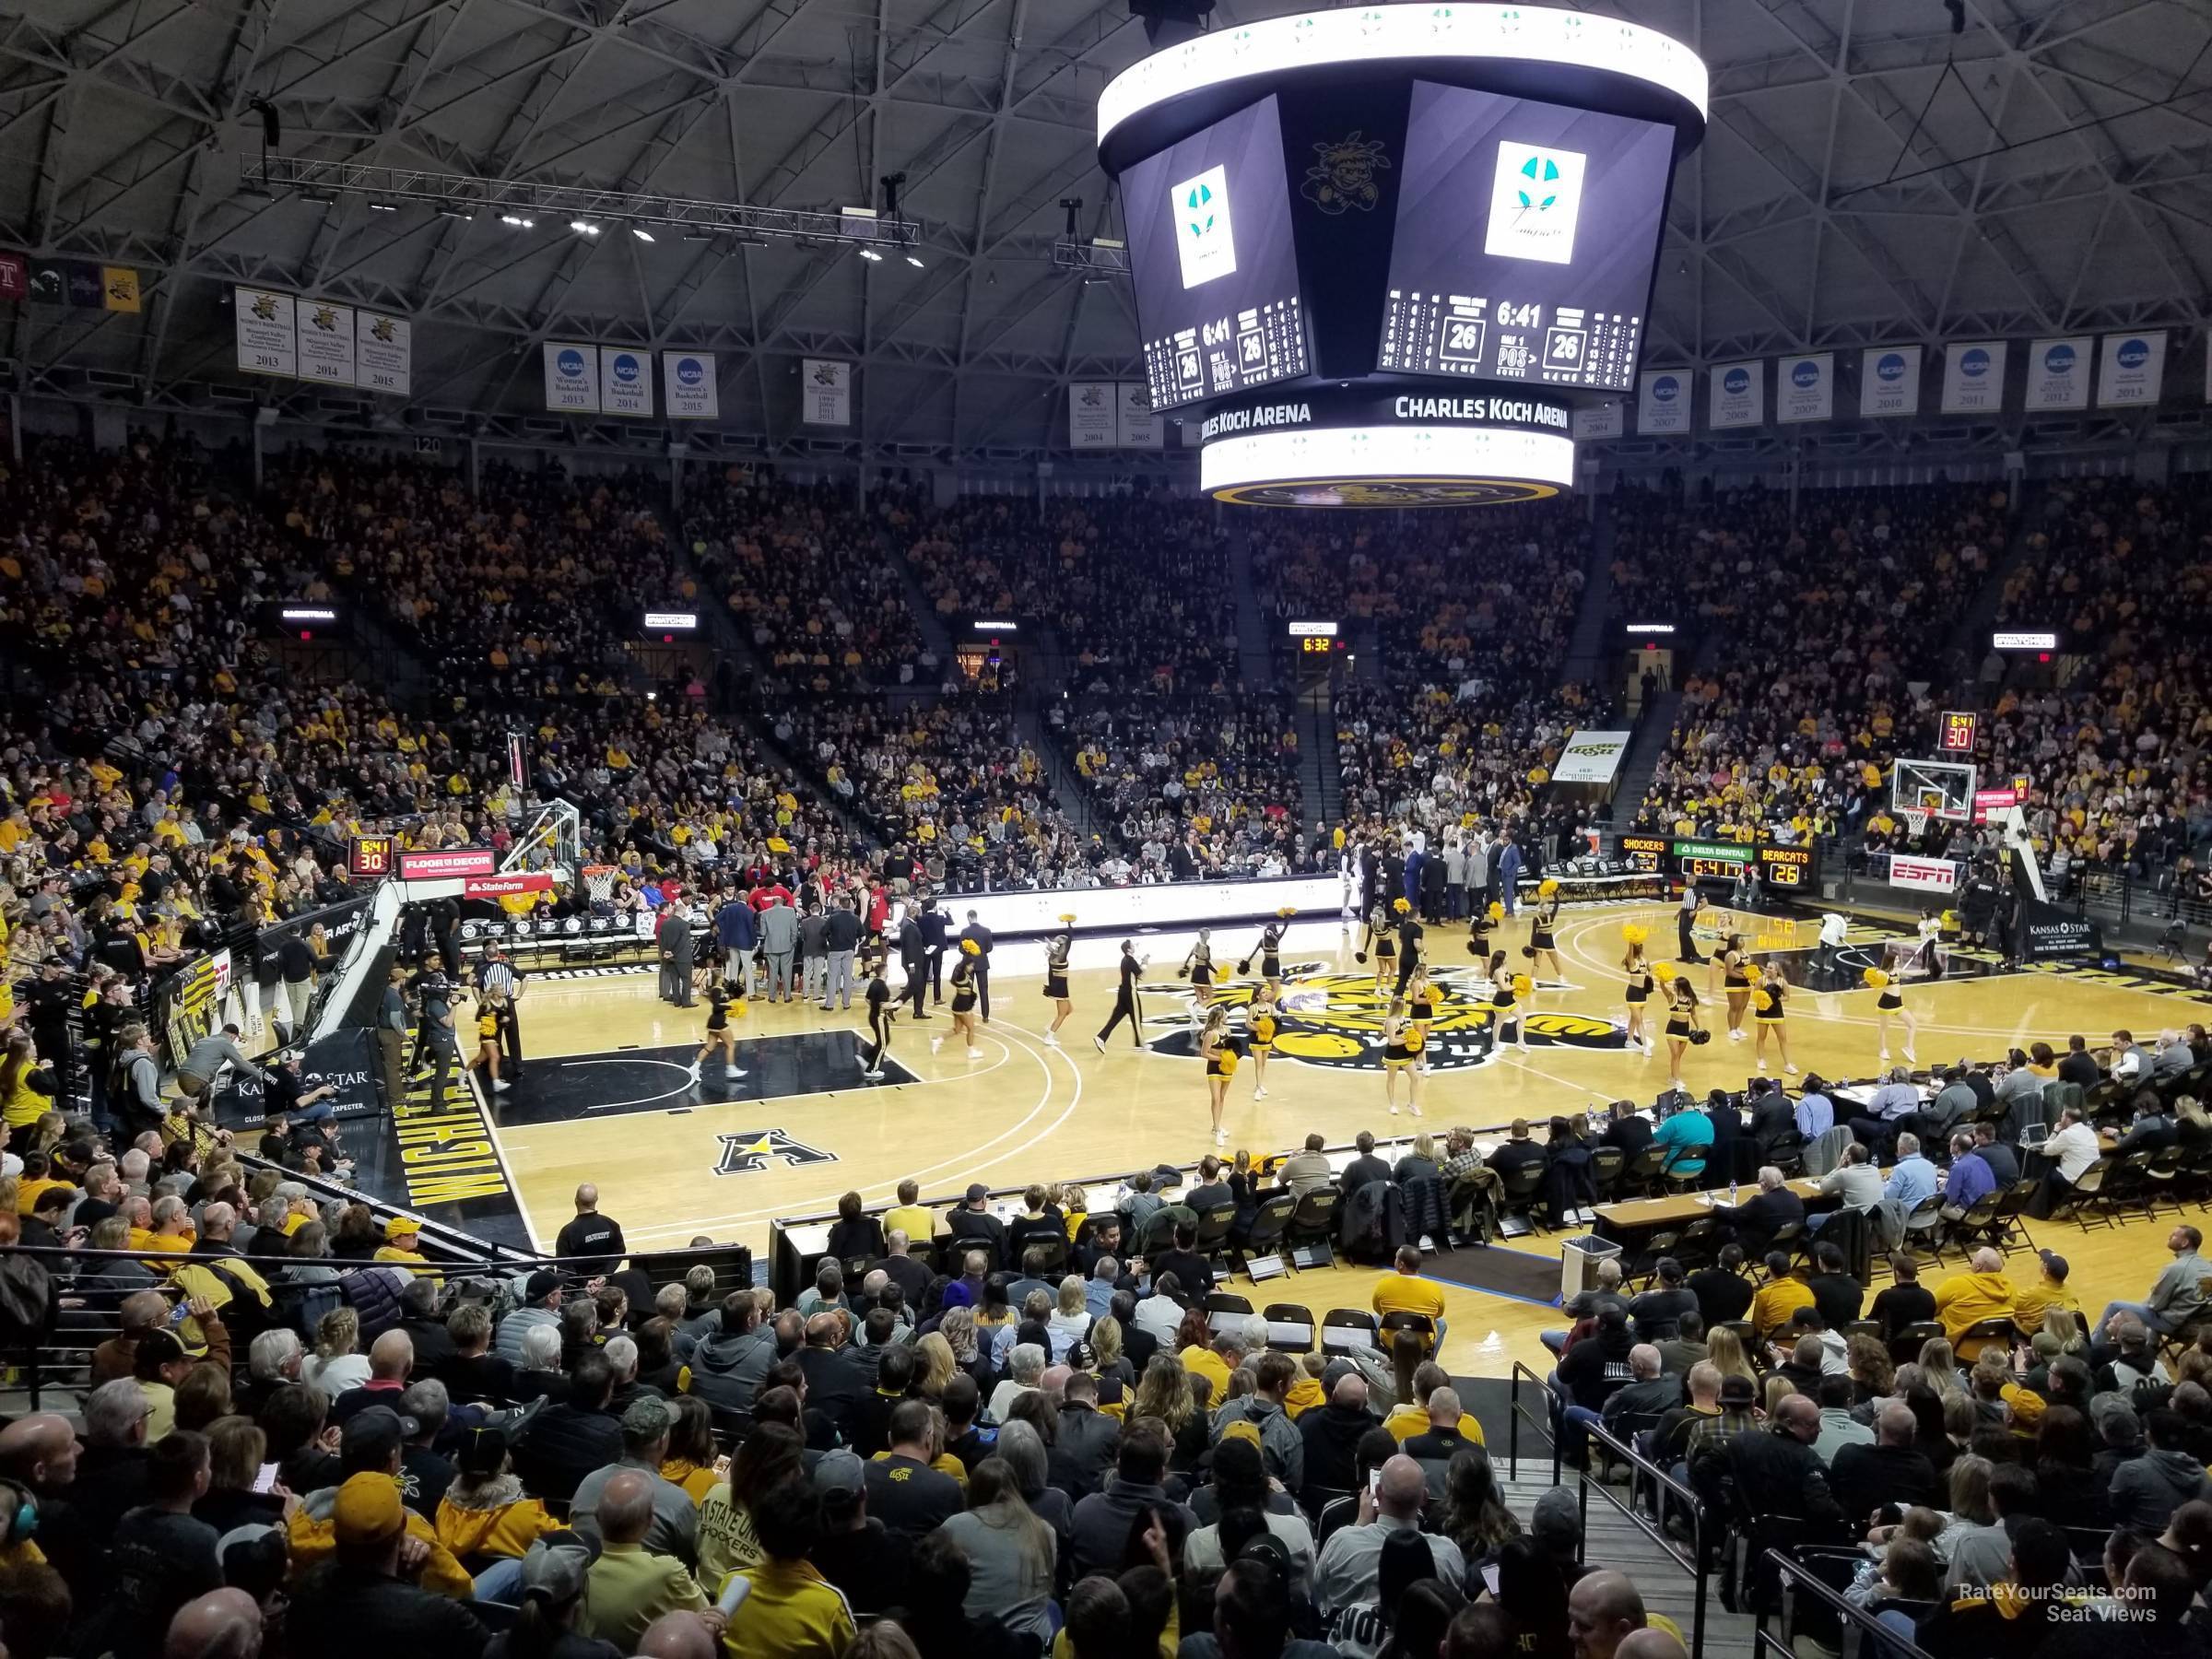 section 111, row 21 seat view  - charles koch arena